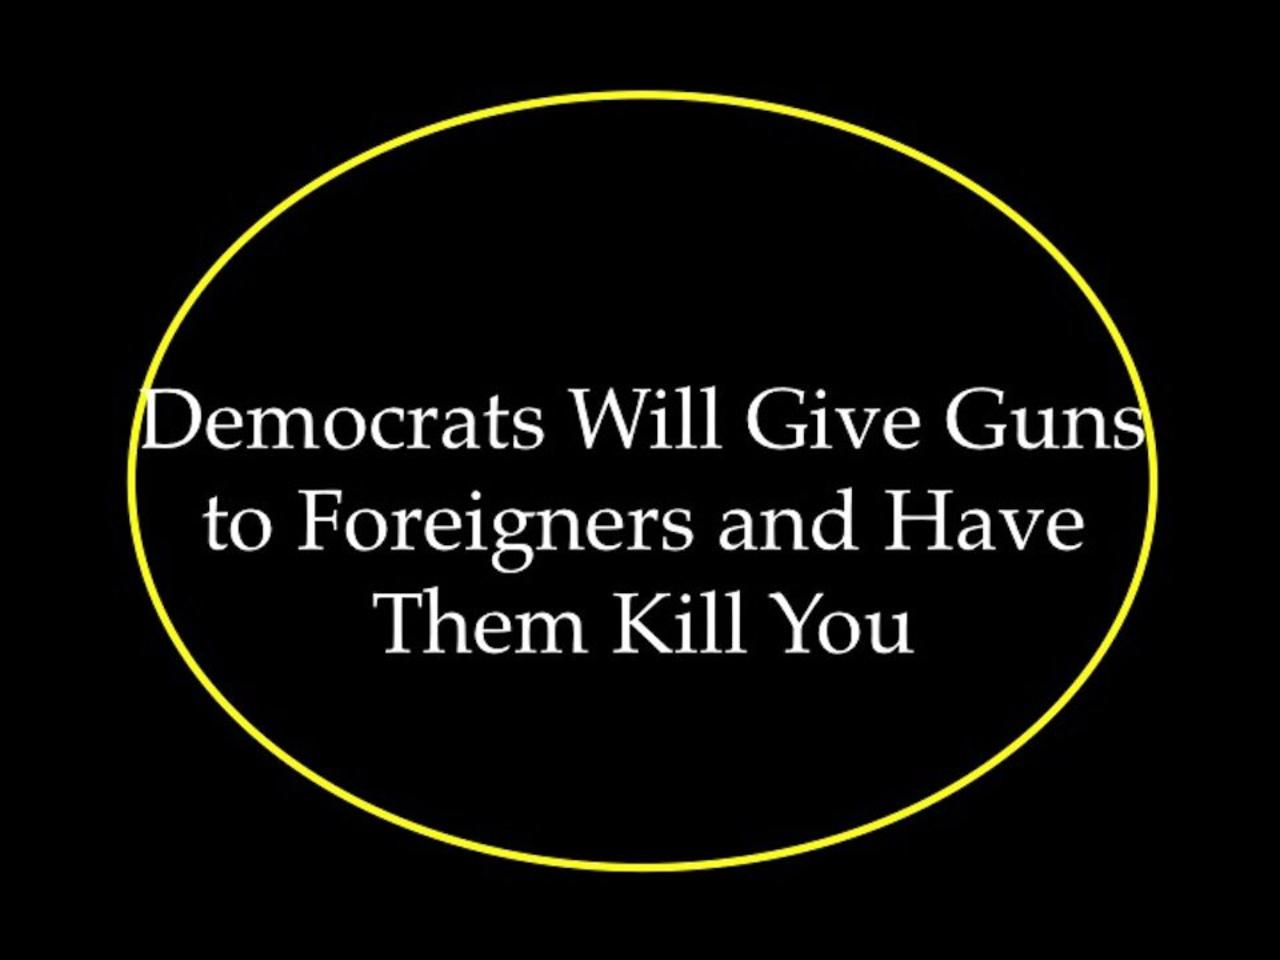 Democrats Will Give Guns to Foreigners and Have Them Kill You